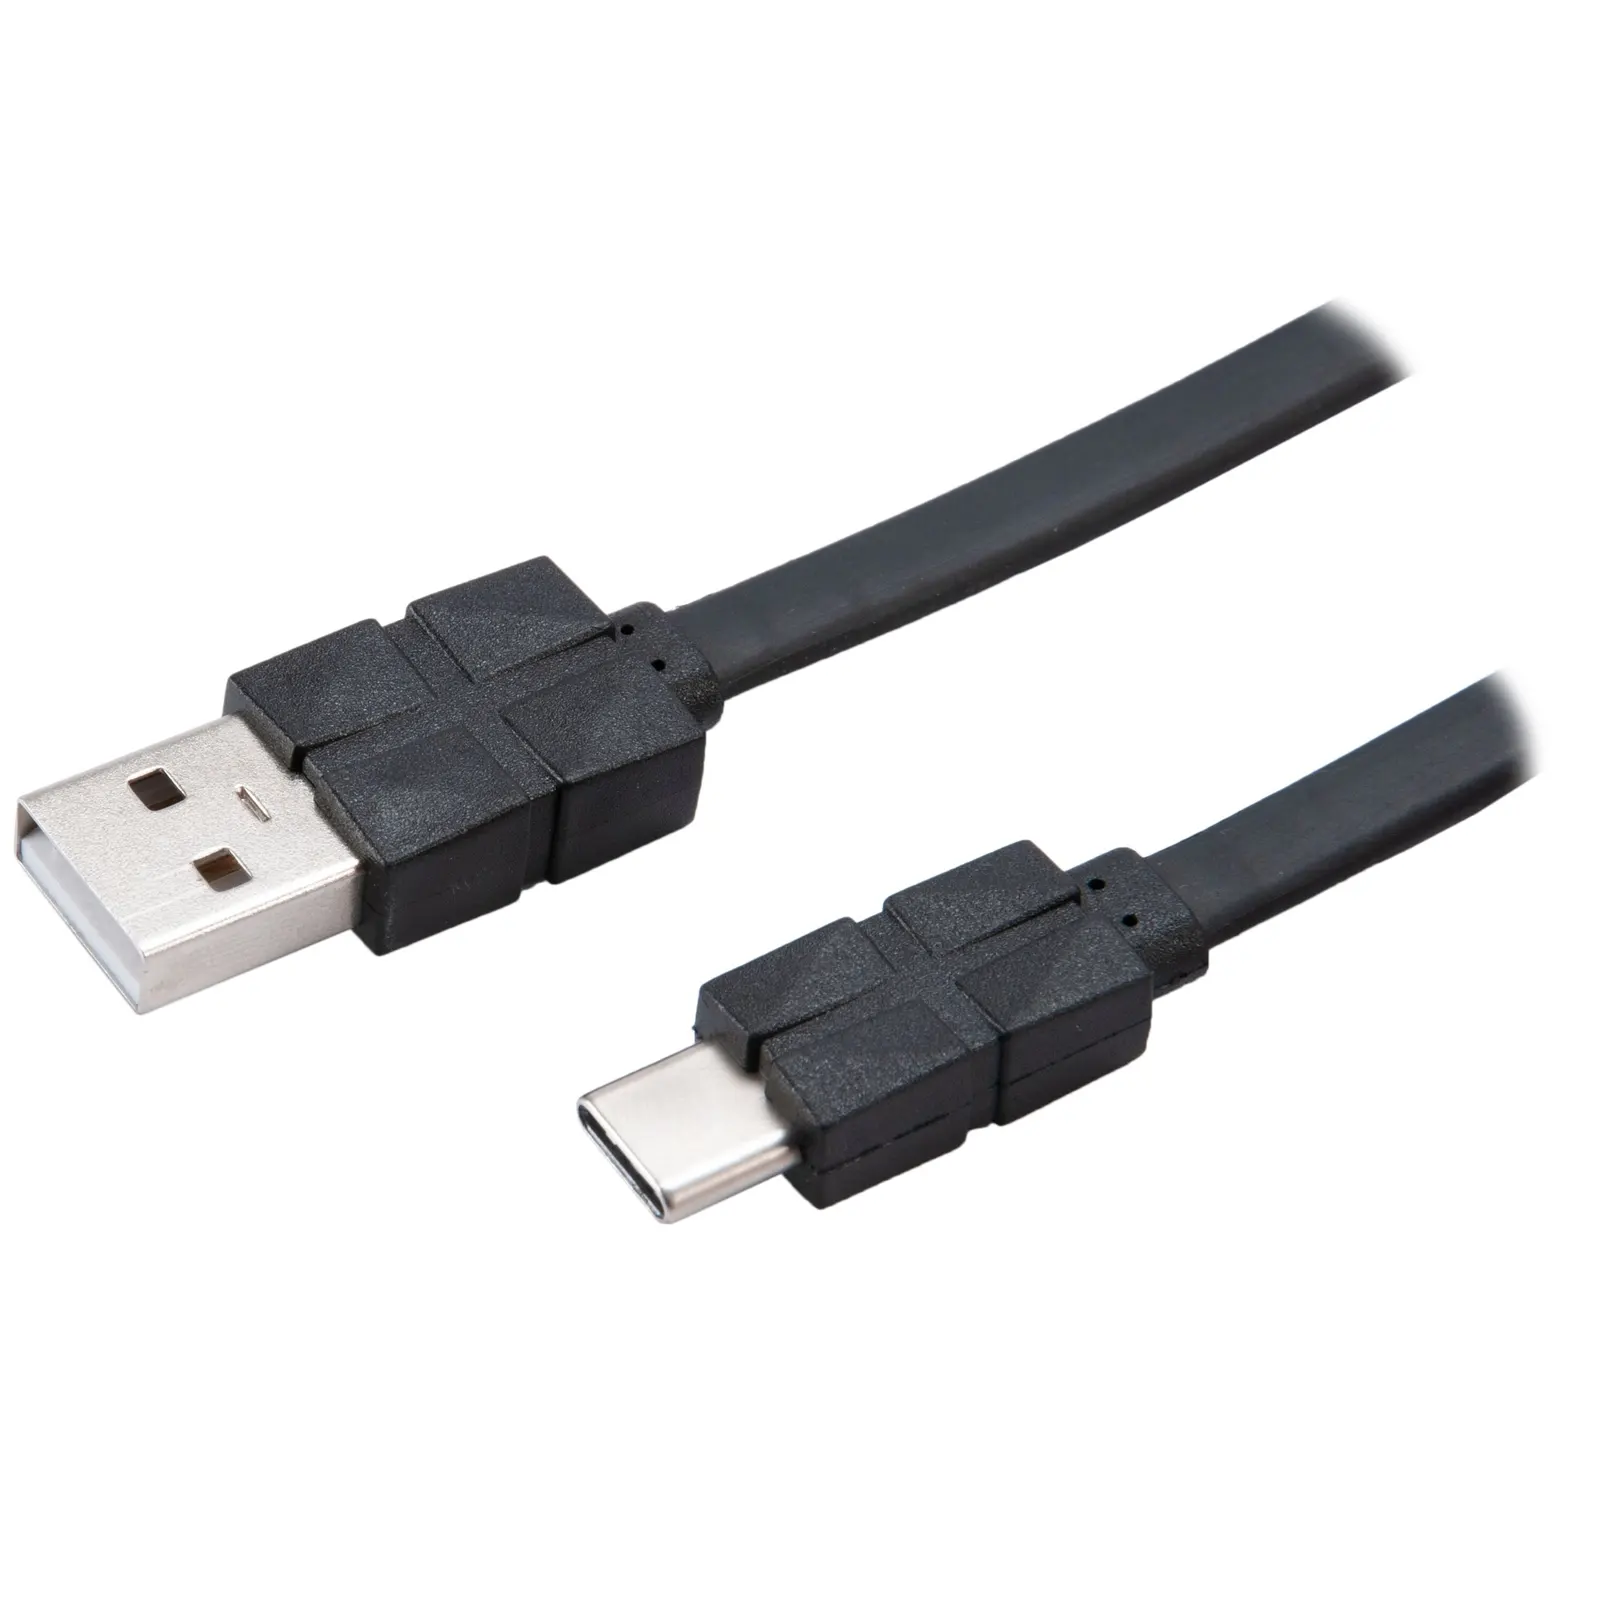 Akasa Proslim USB 2.0 Type-A (M) to USB 2.0 Type-C (M) 1m Black Retail Packaged Data Cable